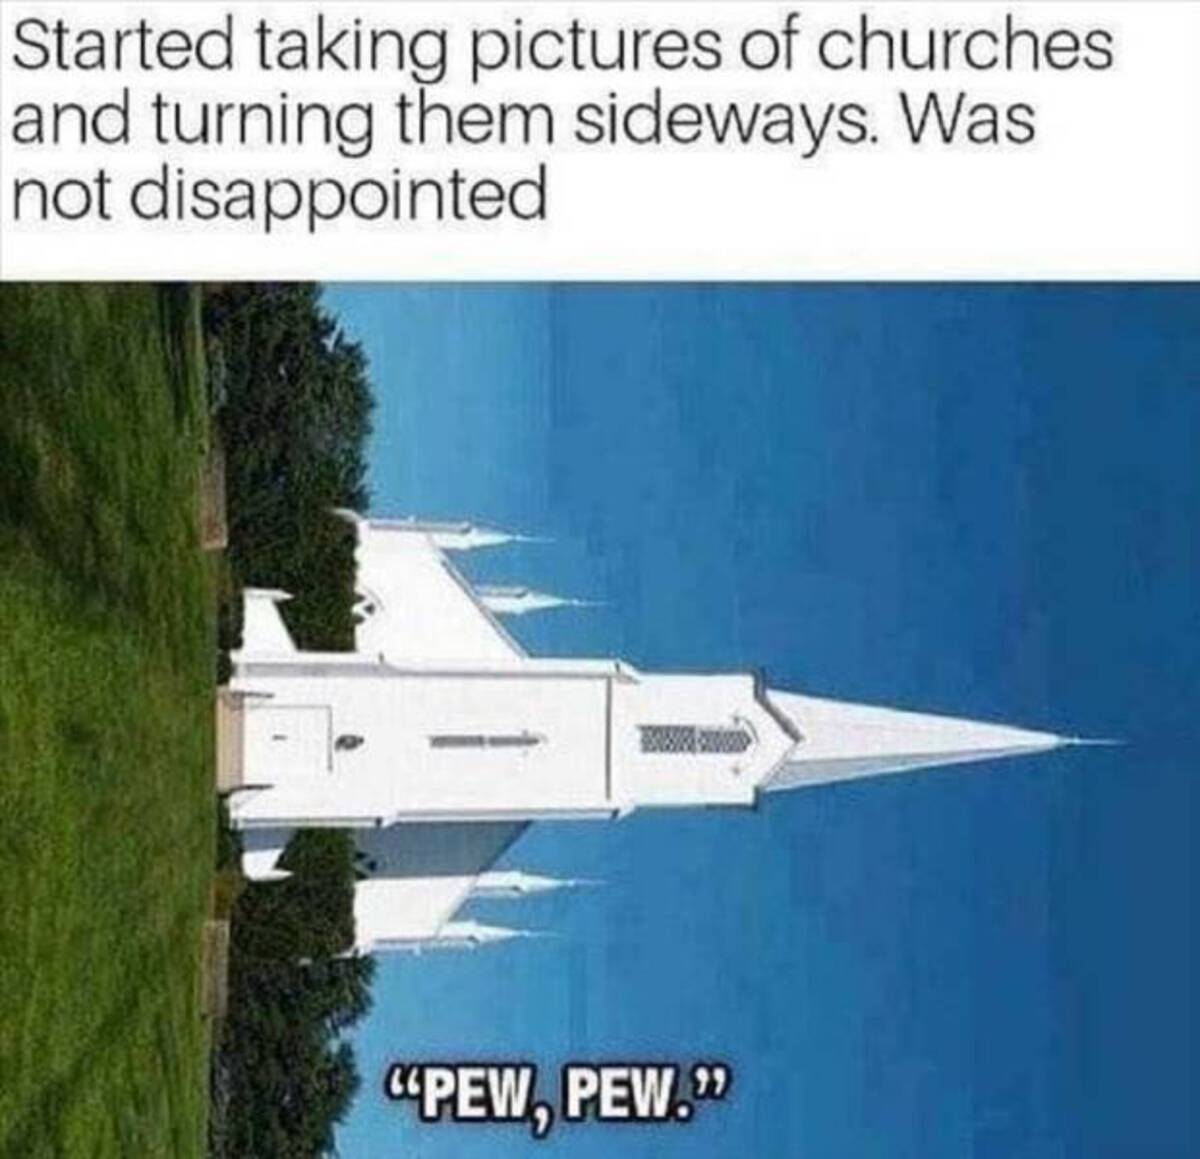 spaceship meme - Started taking pictures of churches and turning them sideways. Was not disappointed "Pew, Pew.